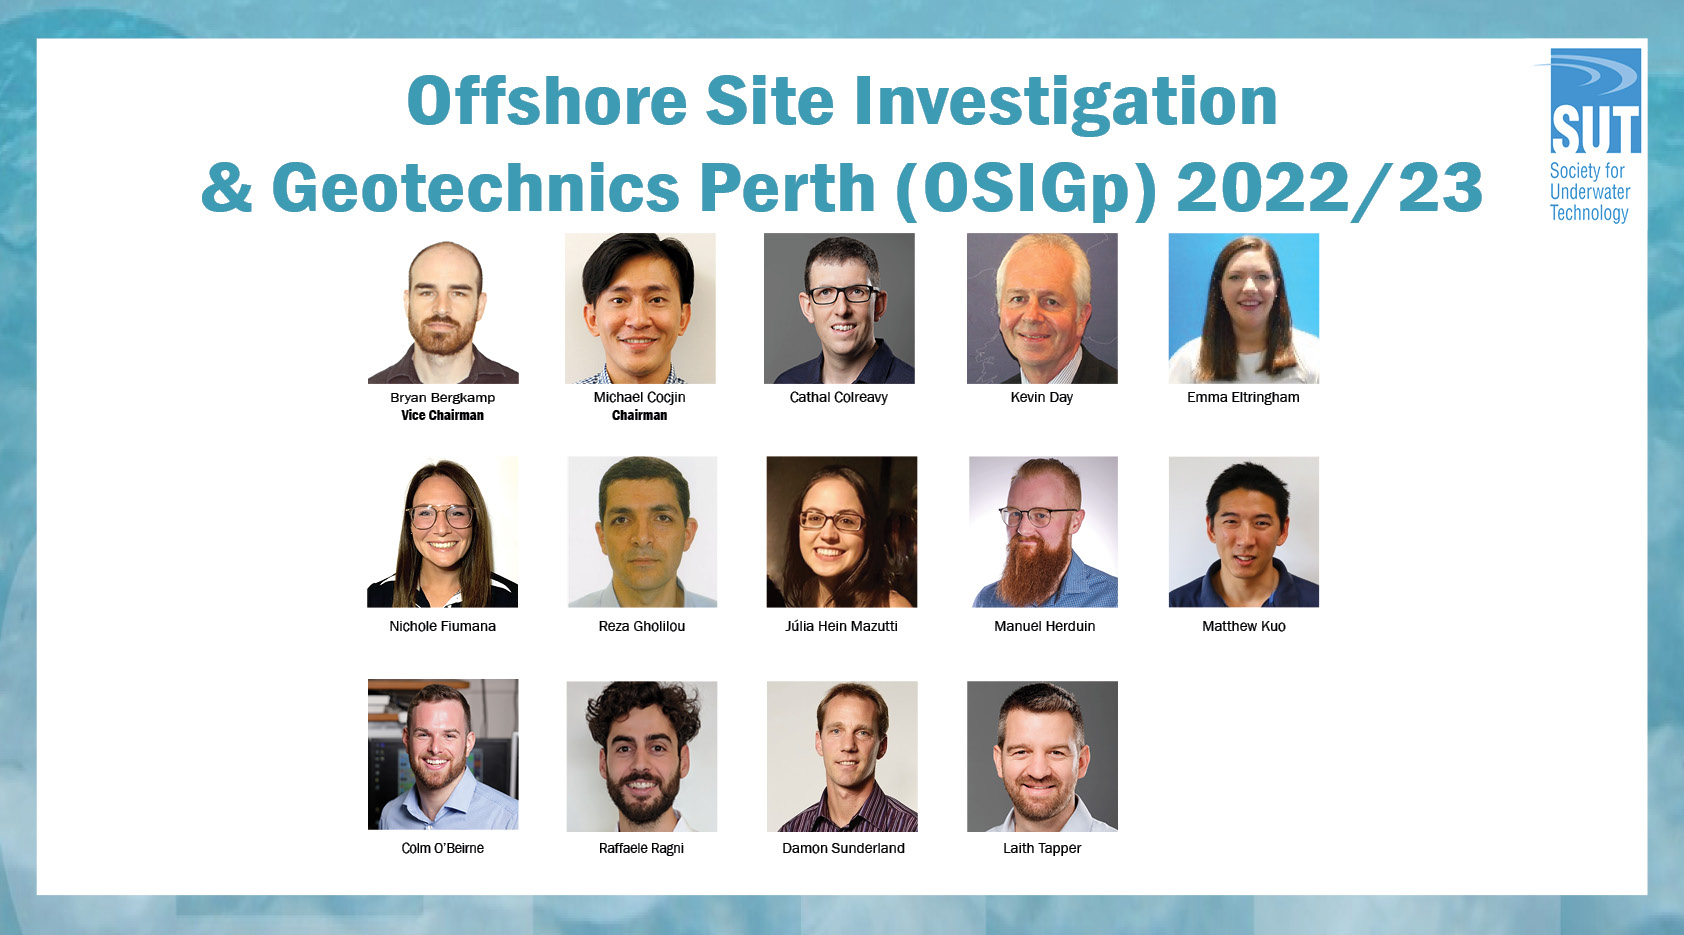 Committee Members 2022-23 for Offshore Site Investigation & Geotechnics in Perth